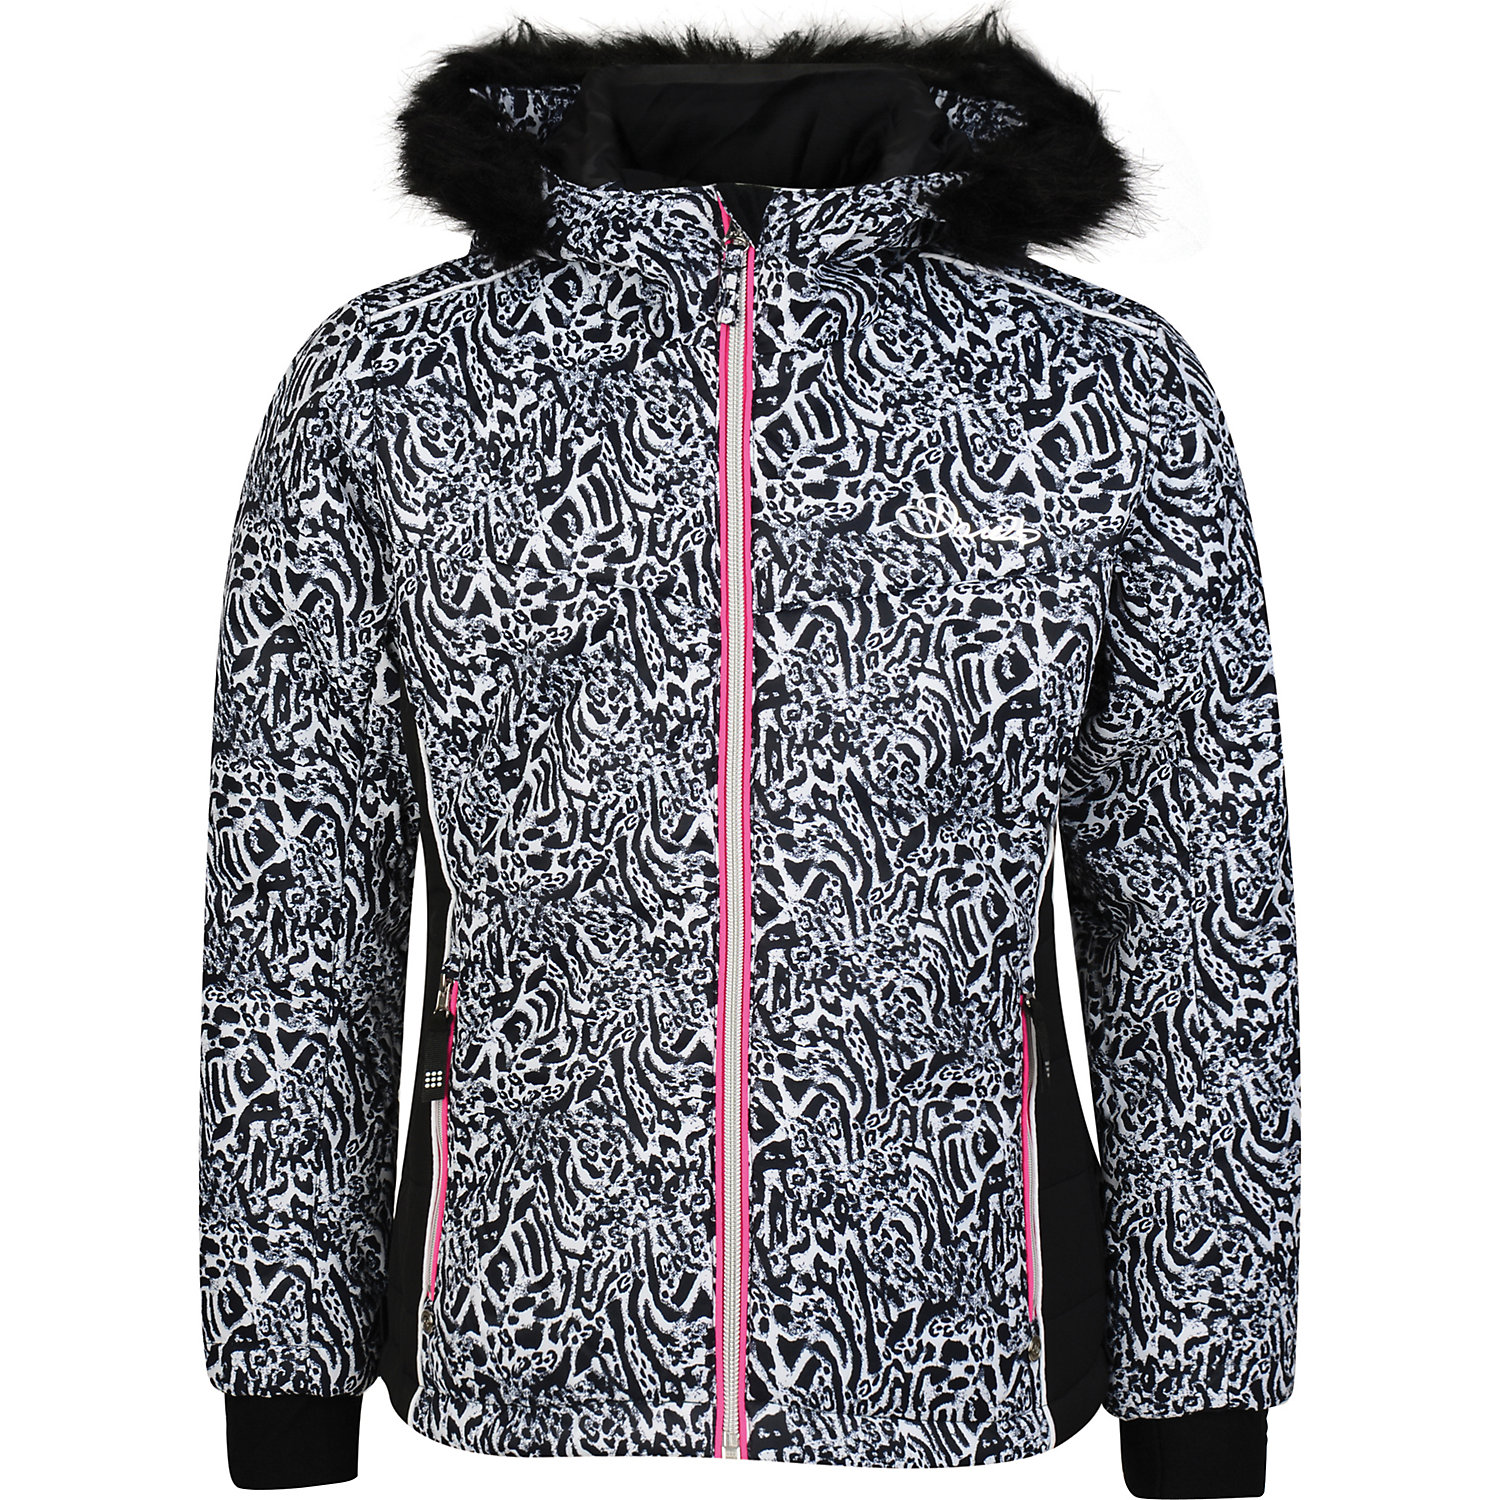 Dare 2b Unisex Kids Muse Waterproof and Breathable Insulated Ski Jacket